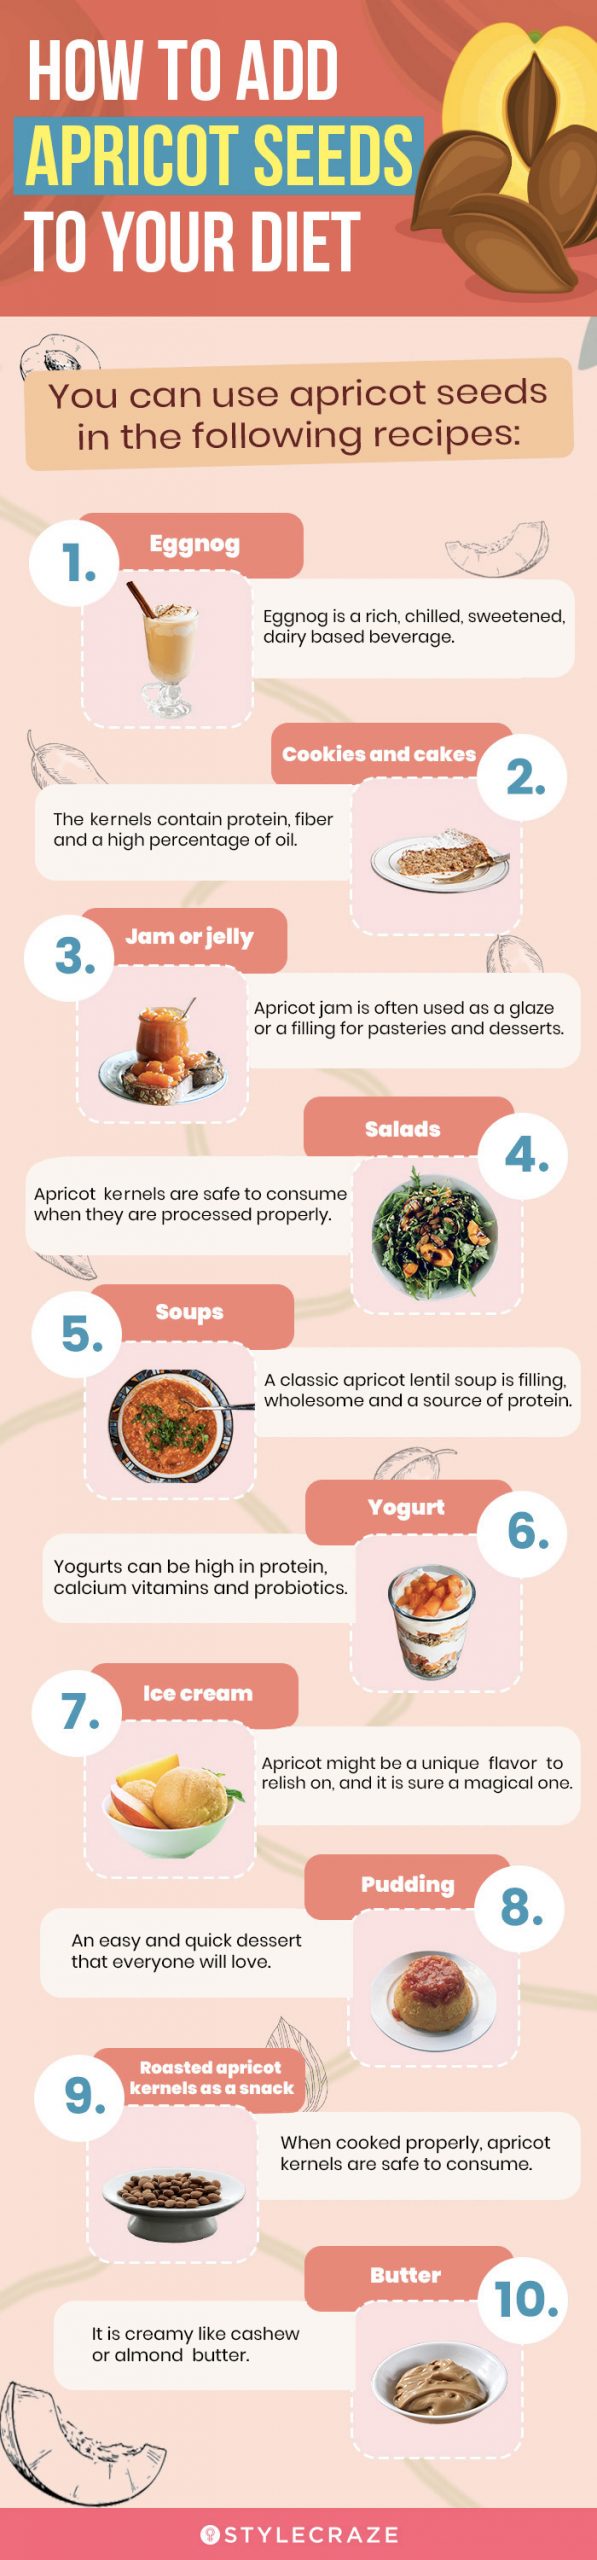 how to add apricot seeds to your diet (infographic)